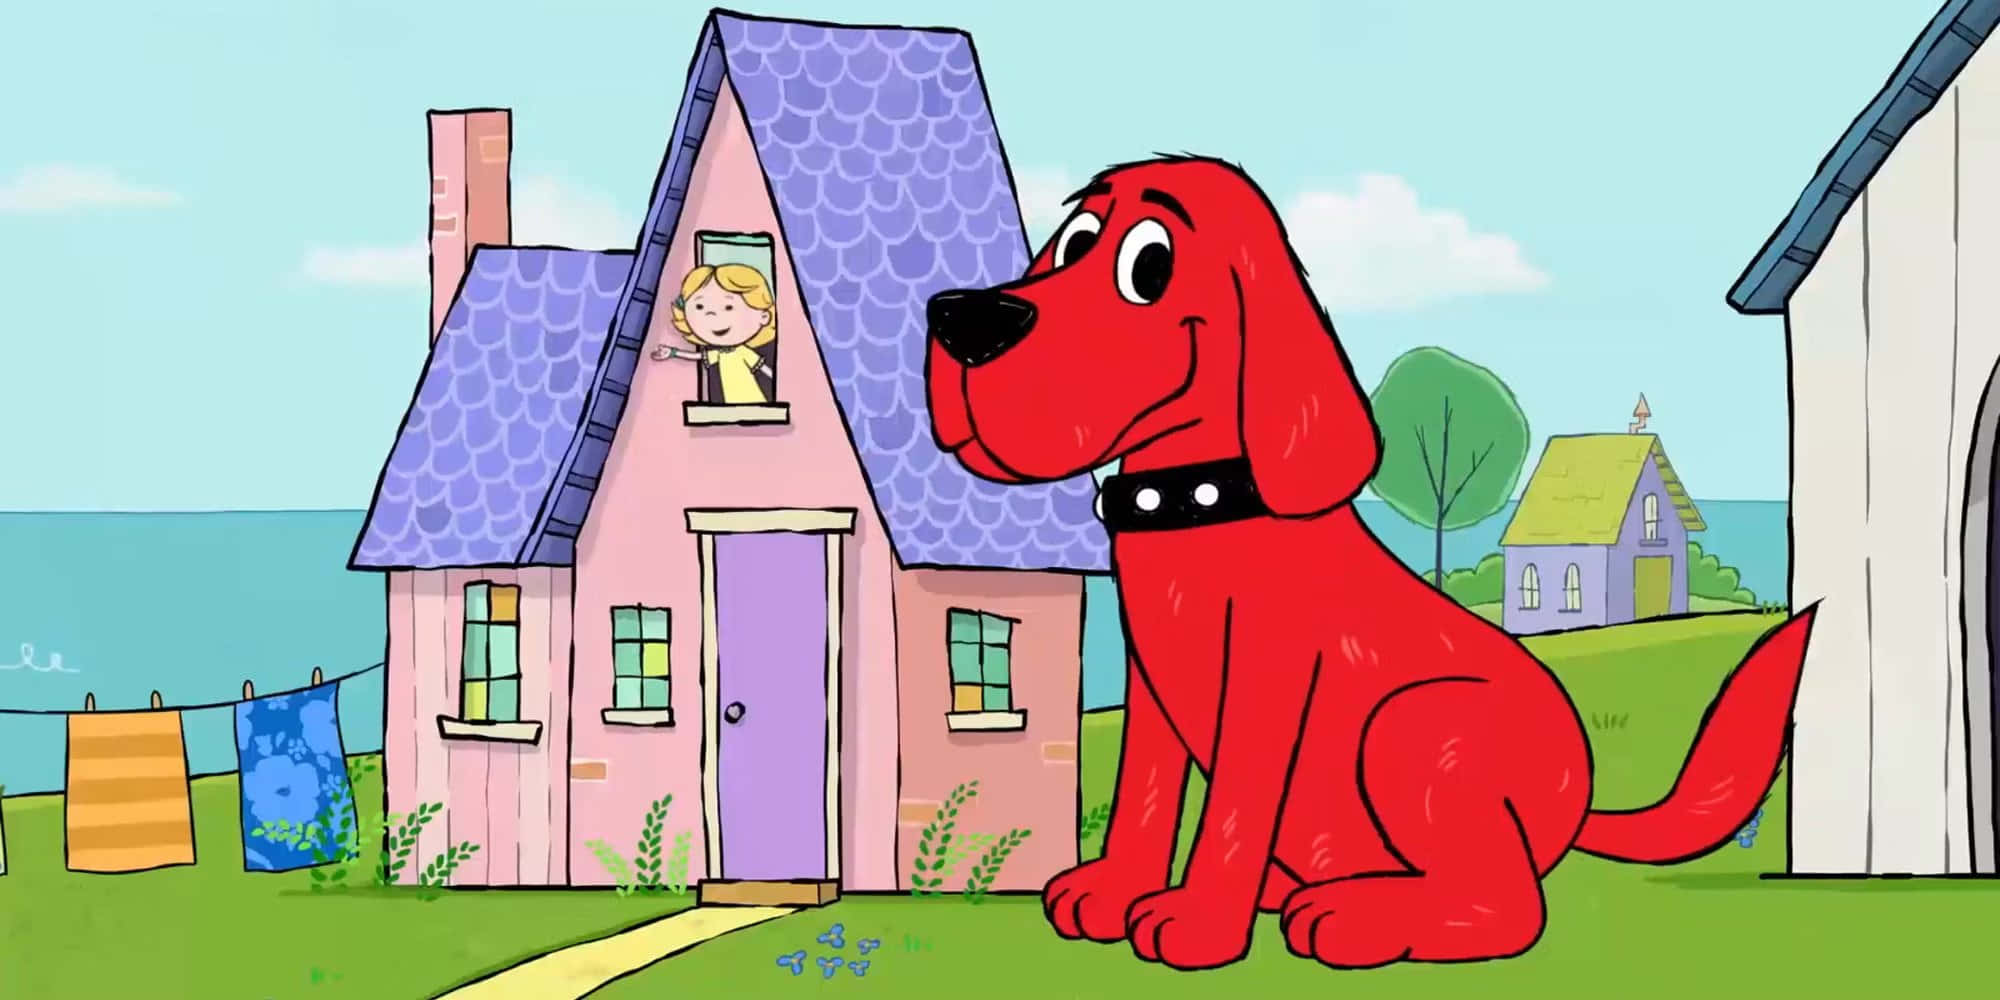 Clifford the Big Red Dog spreads warmth and laughter!